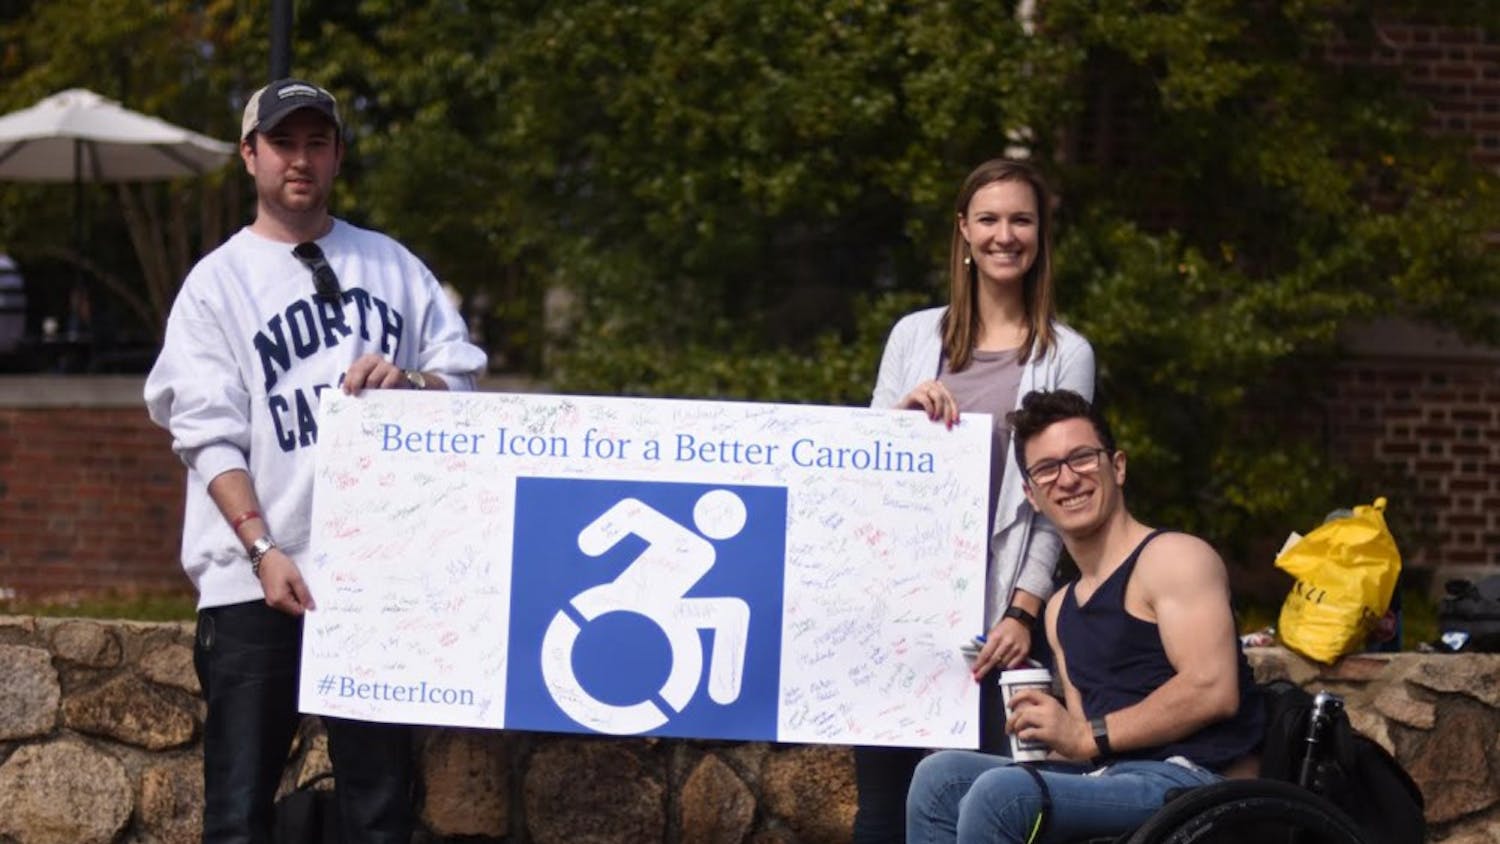 Students Mark Ellard, a senior history major (left), Marie Payne, a senior exercise and sports science major, and Chris Corsi, a junior psychology major in the pit on Thursday, trying to gain signatures in other to change accessibility signs on campus to a more active looking sign.